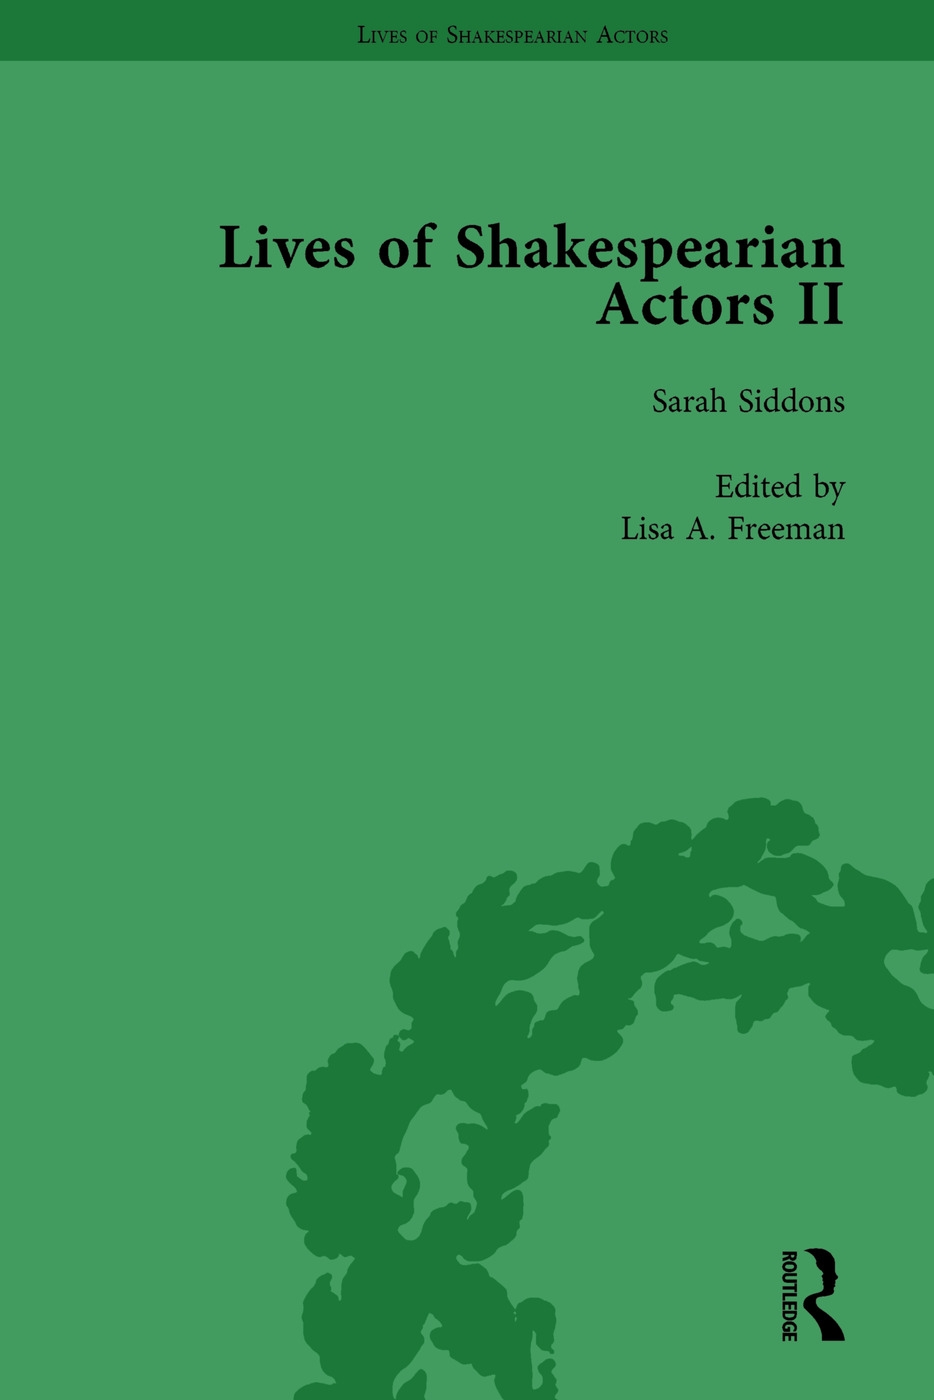 Lives of Shakespearian Actors, Part II, Volume 2: Edmund Kean, Sarah Siddons and Harriet Smithson by Their Contemporaries